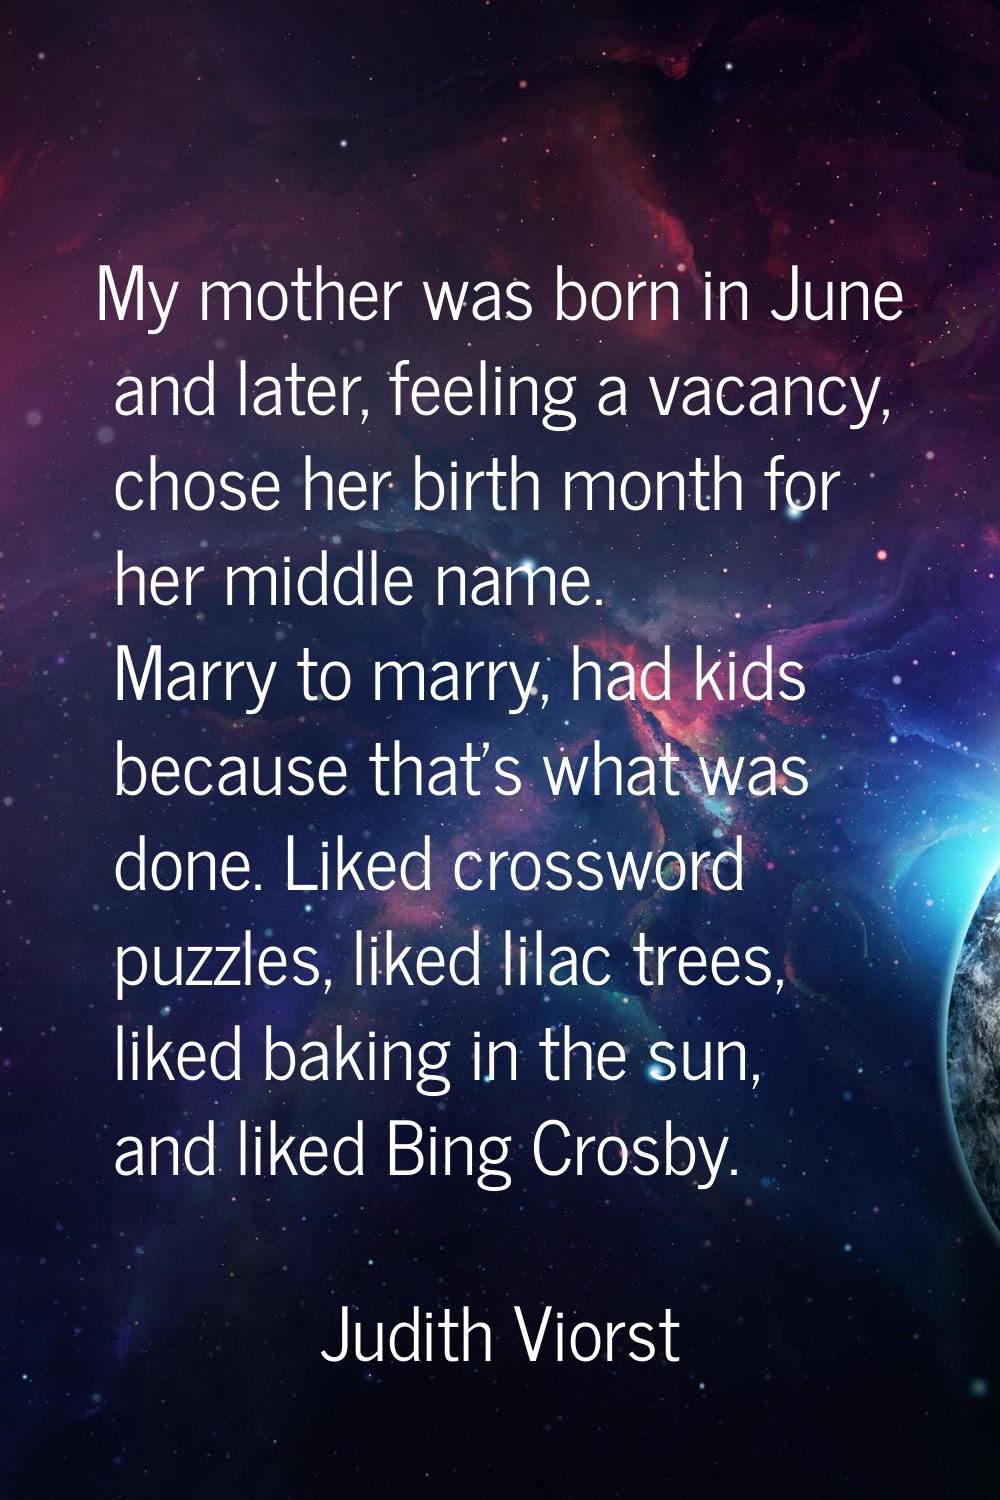 My mother was born in June and later, feeling a vacancy, chose her birth month for her middle name.